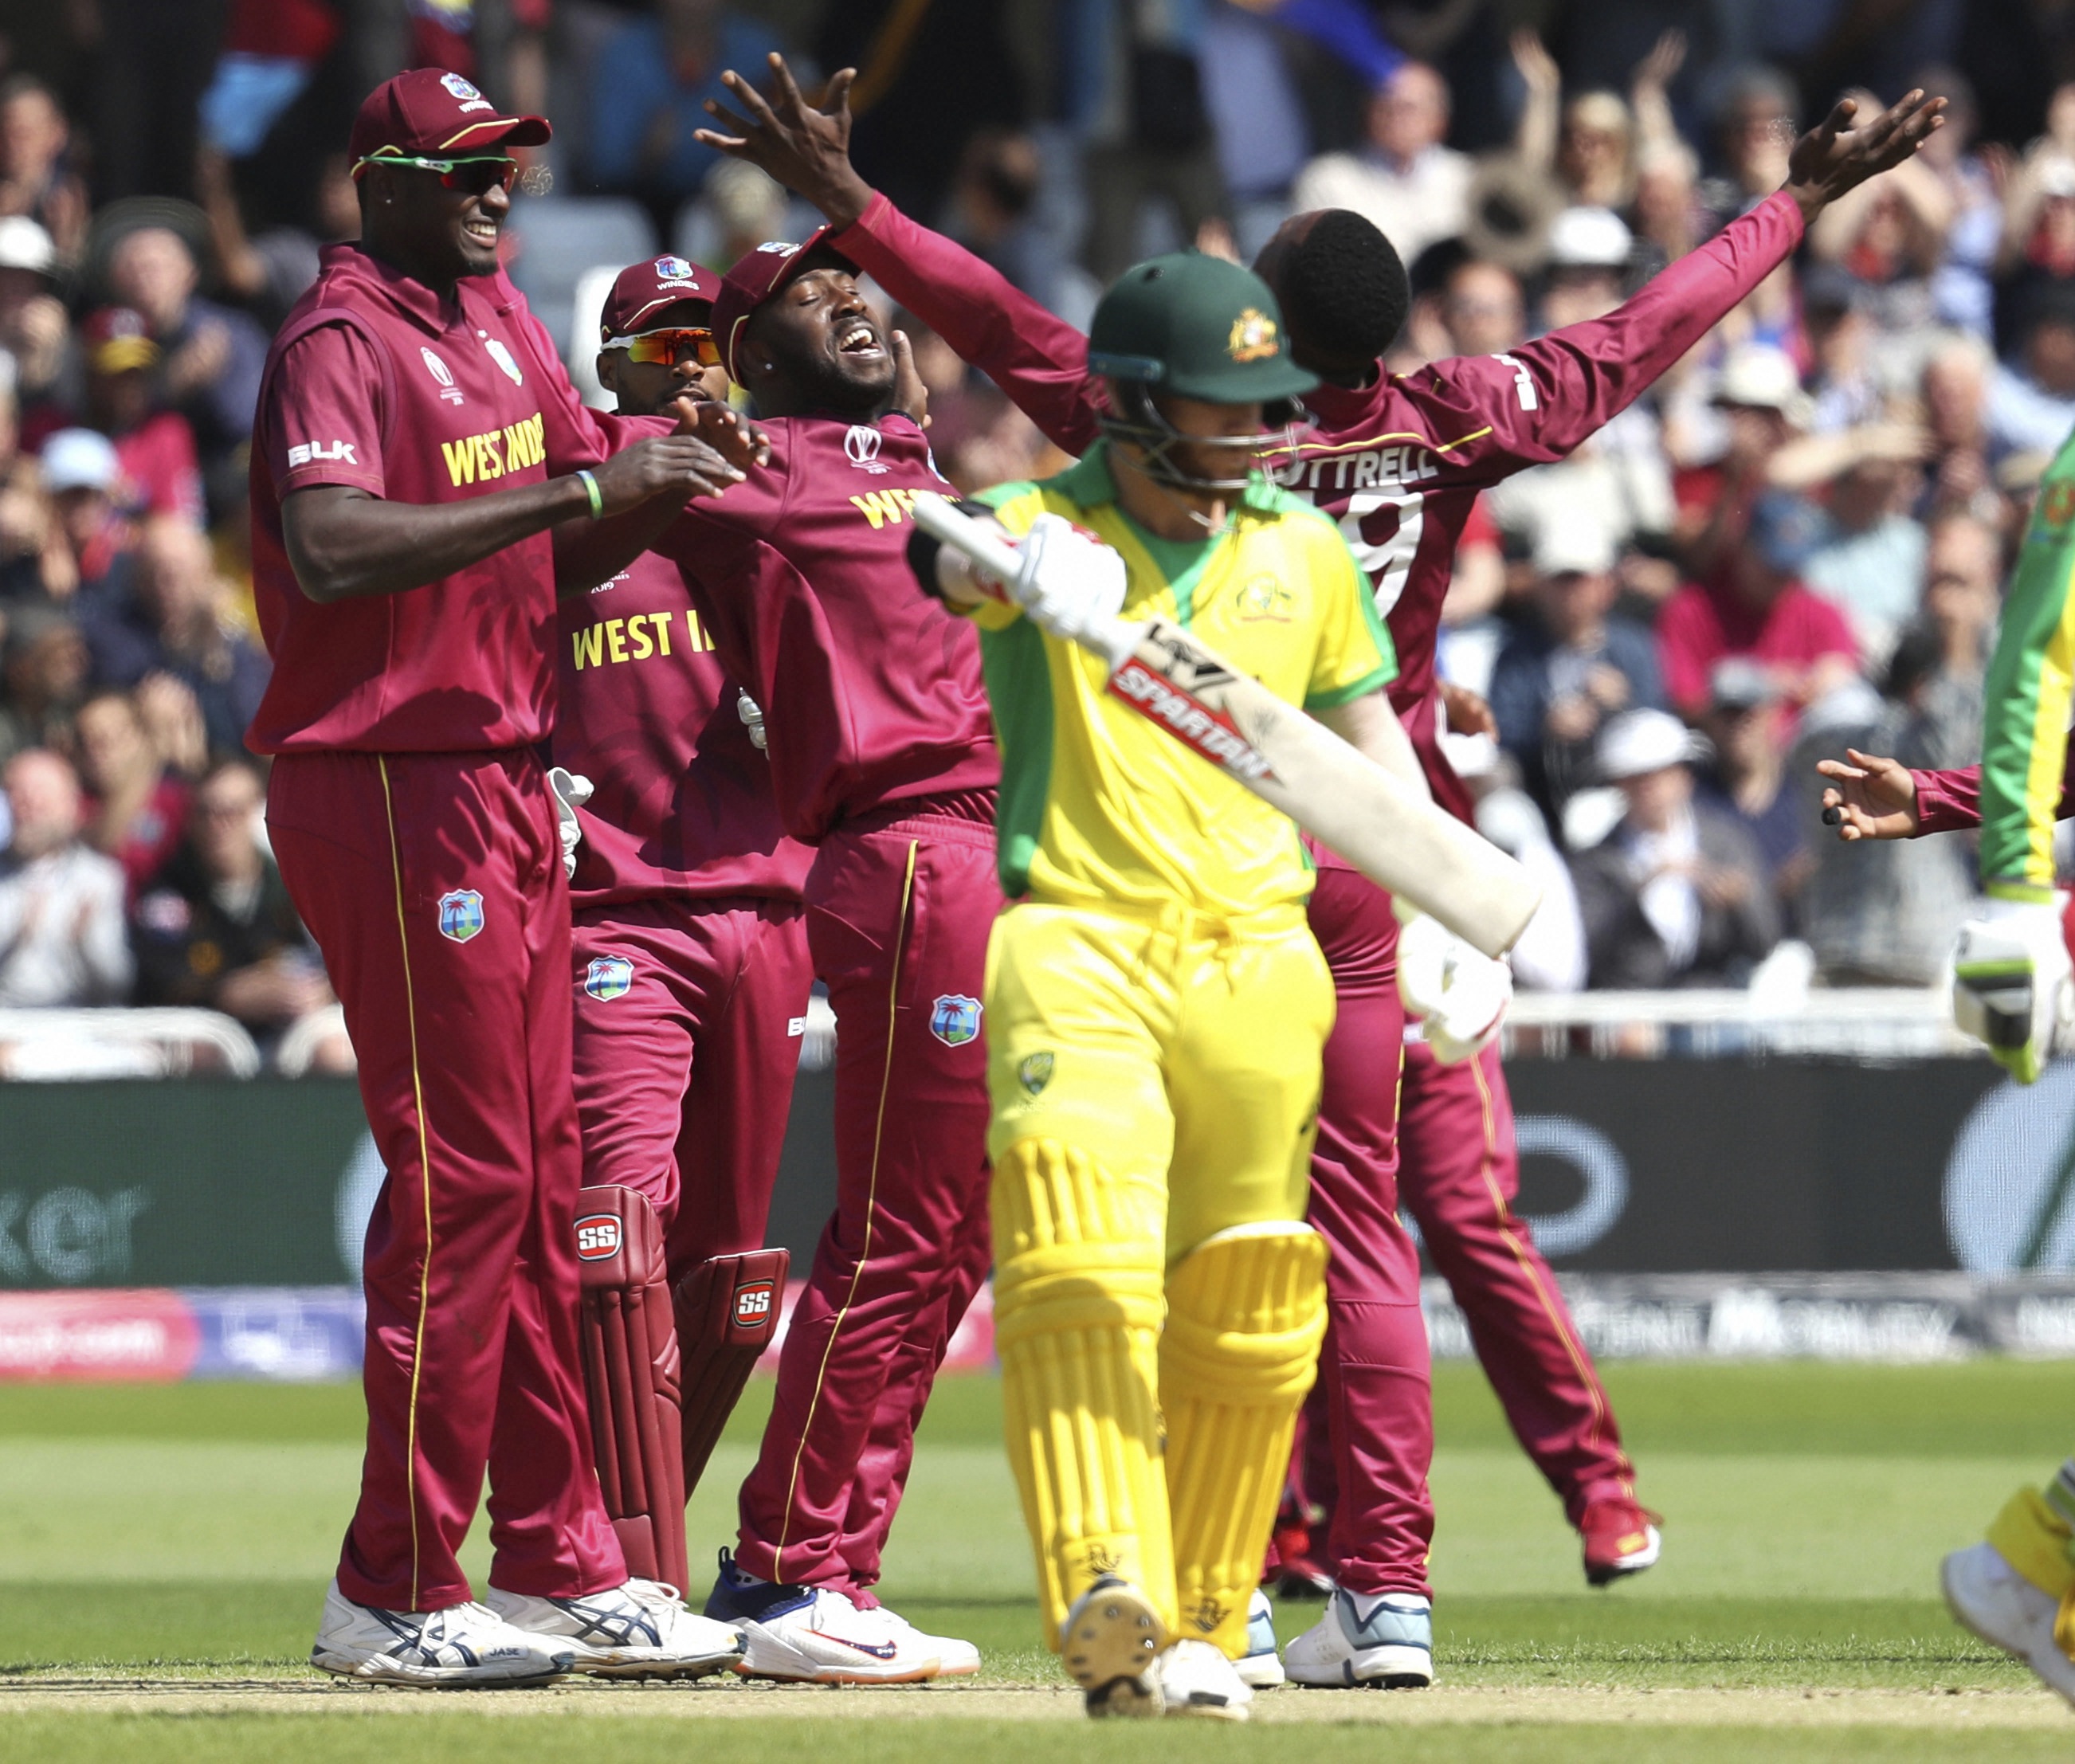 Will the famous pace attack of Windies see them through?